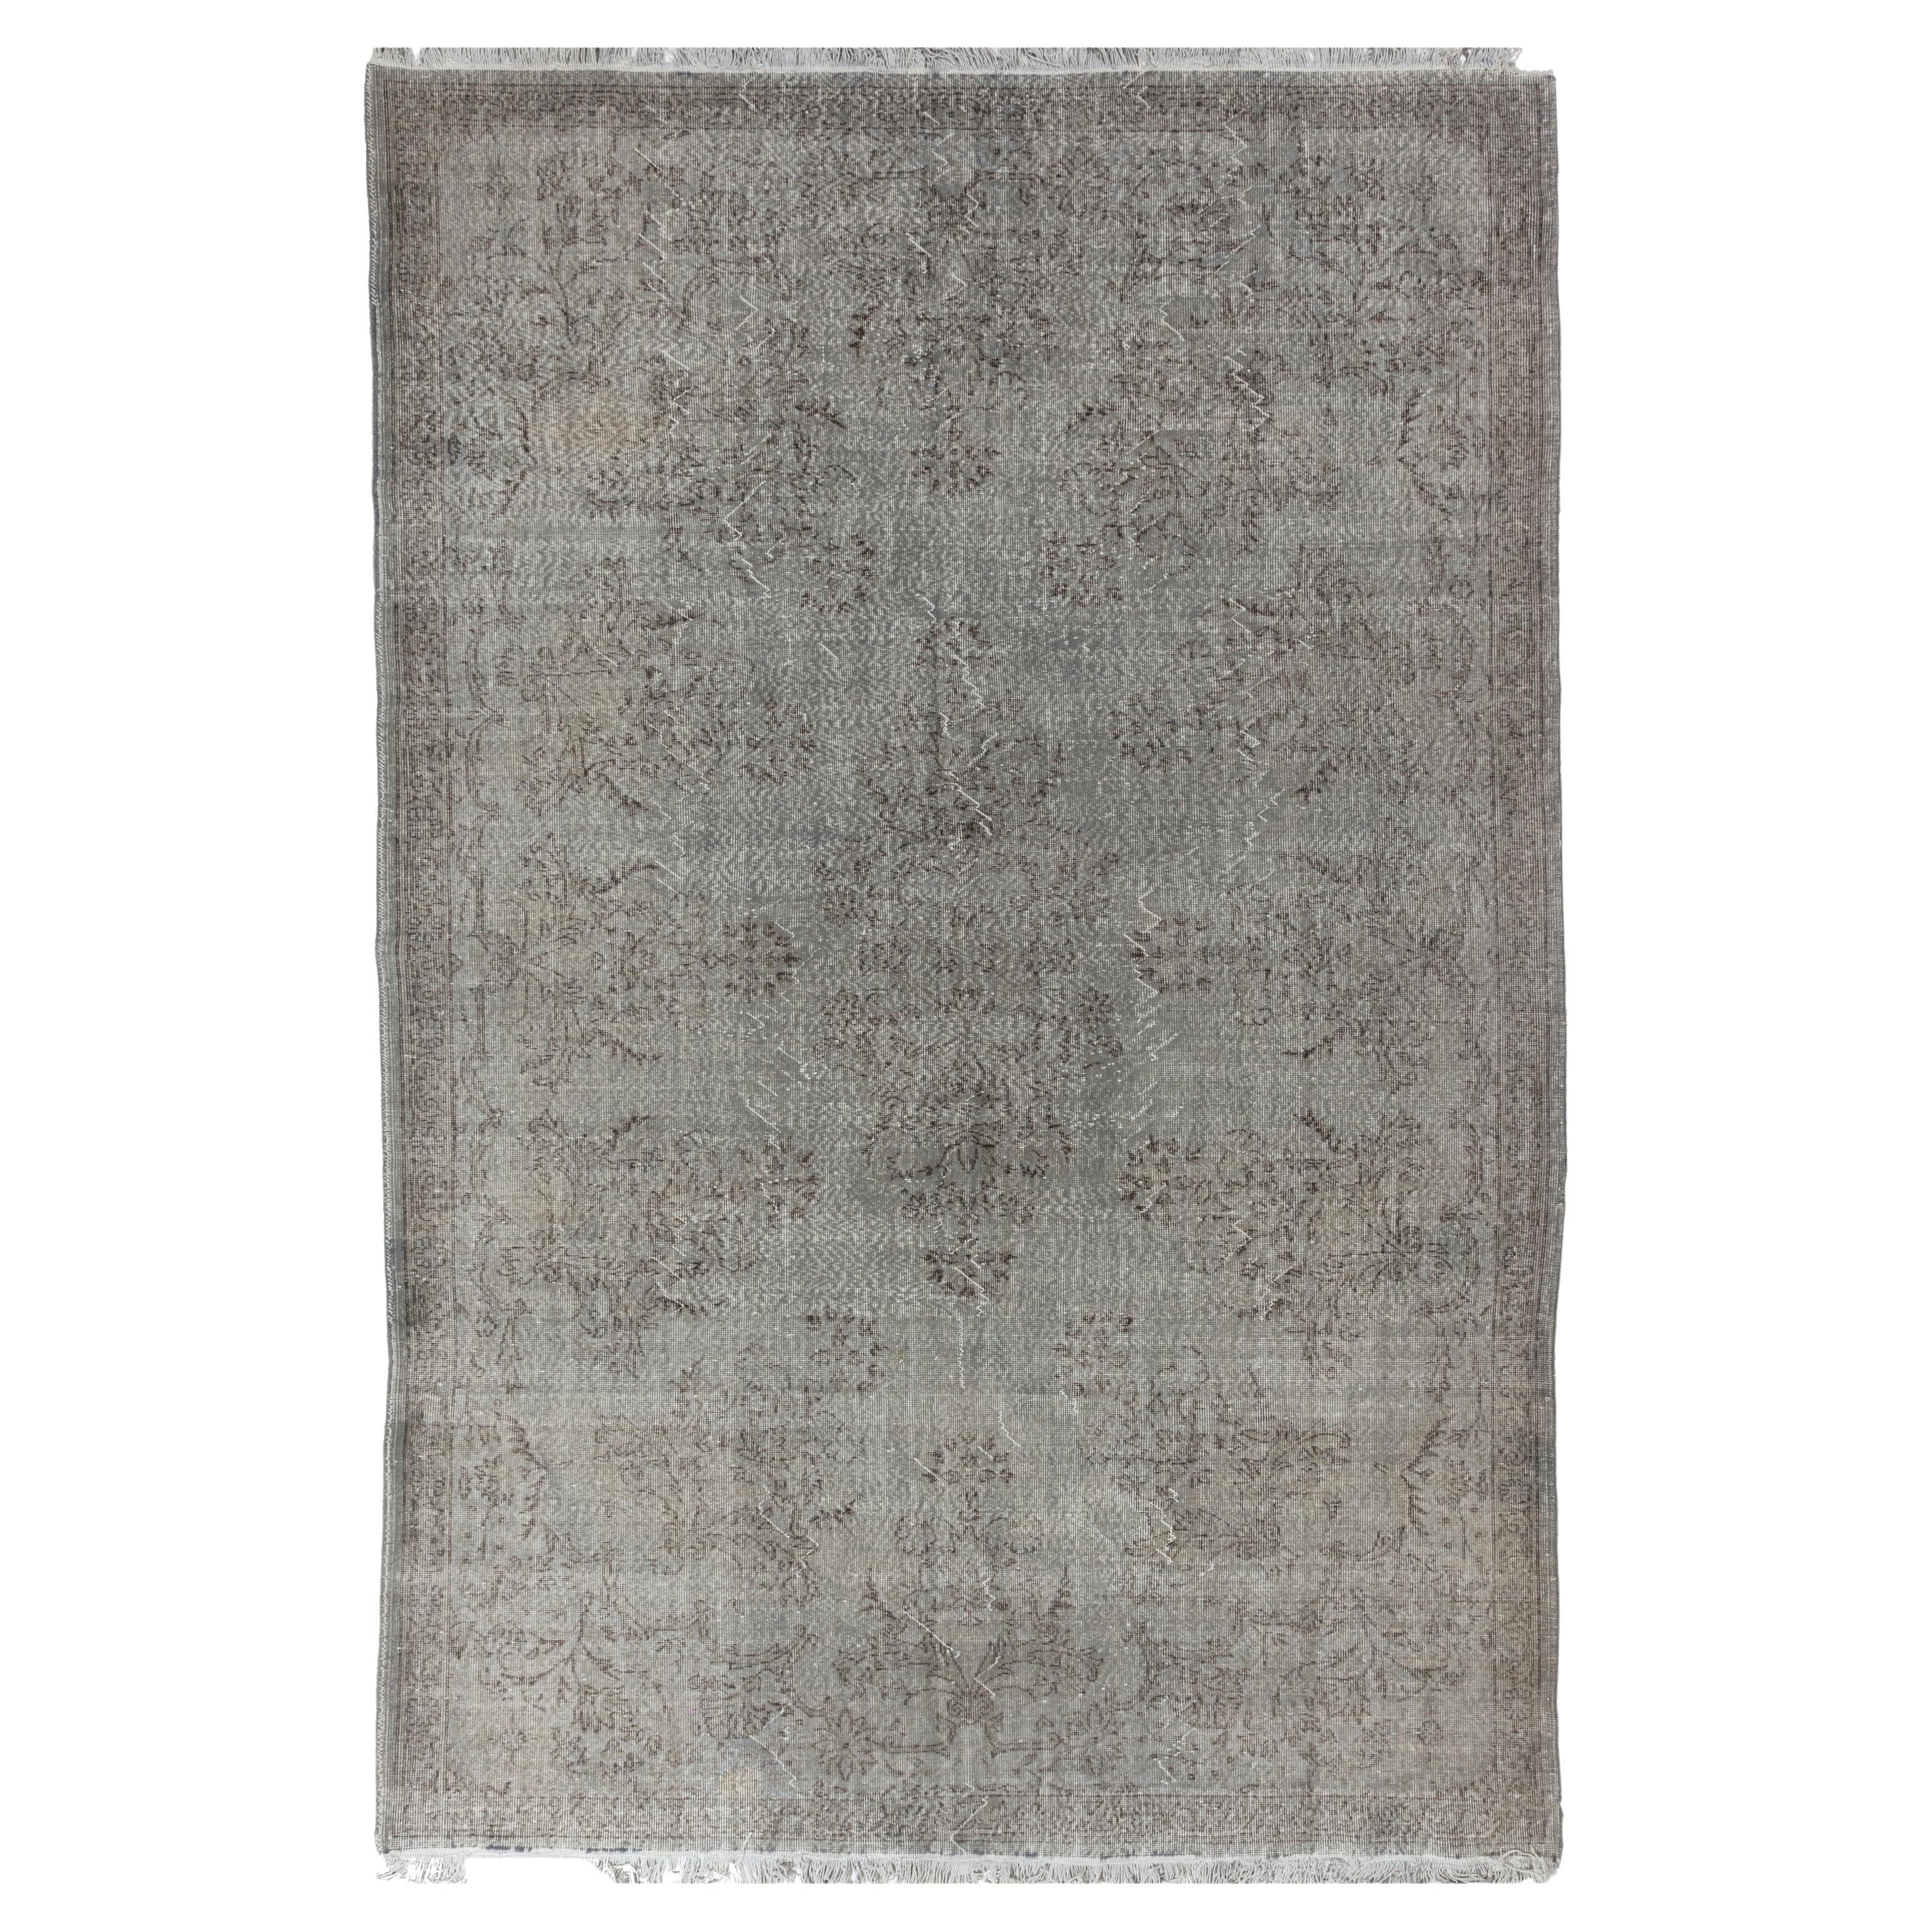 7.6x11.4 Ft Vintage Oriental Rug ReDyed in Gray Color for Contemporary Interiors For Sale